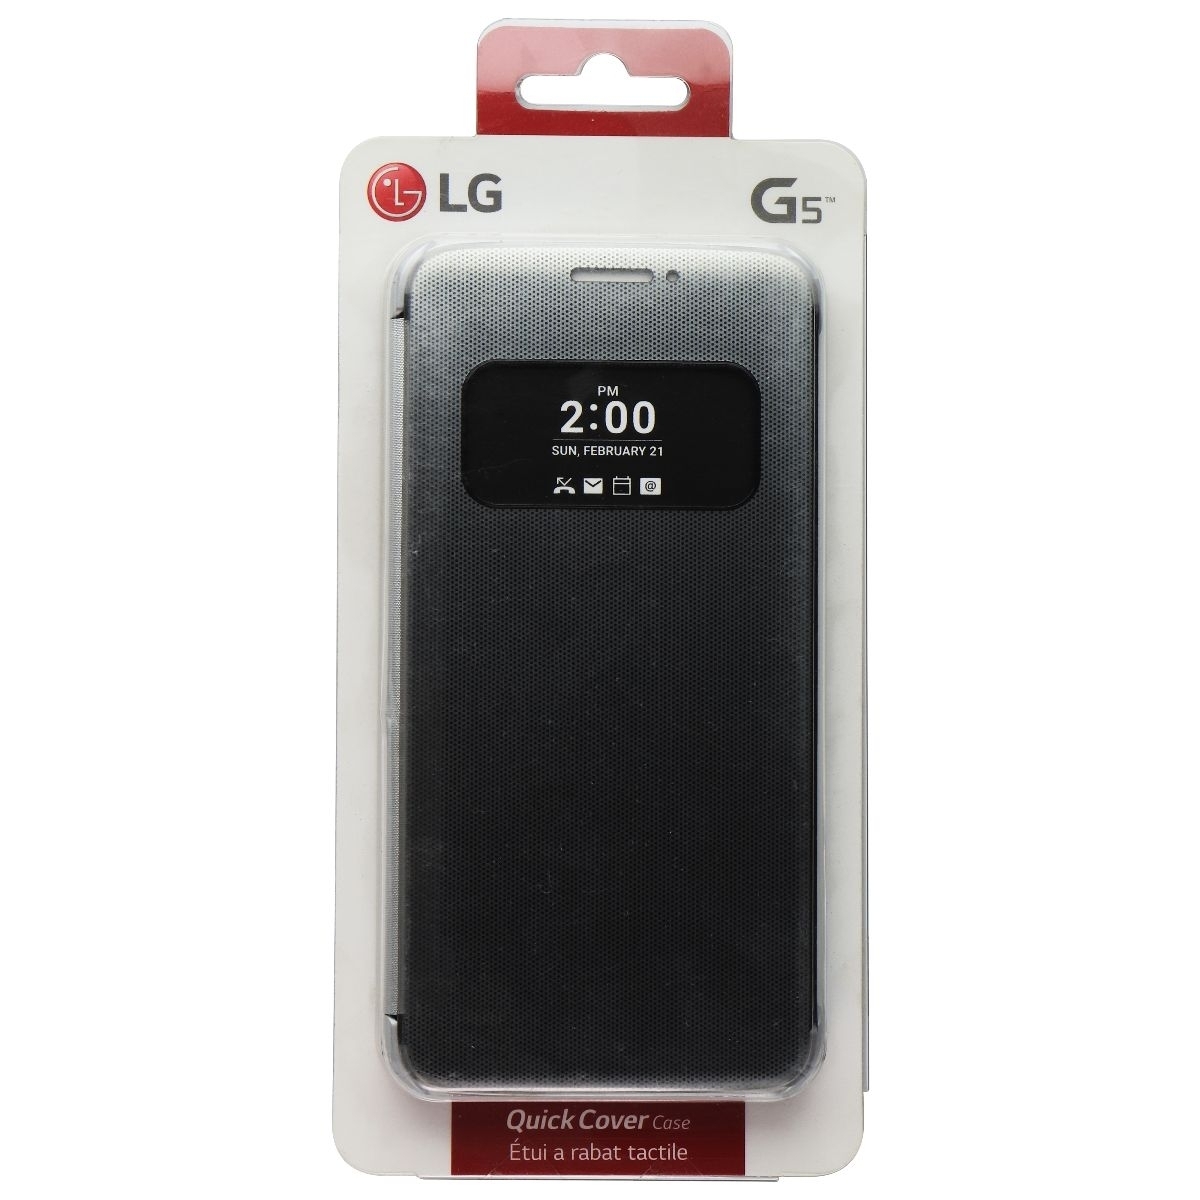 LG Official Quick Cover Case For LG G5 - Silver (CFV-160) (Refurbished)